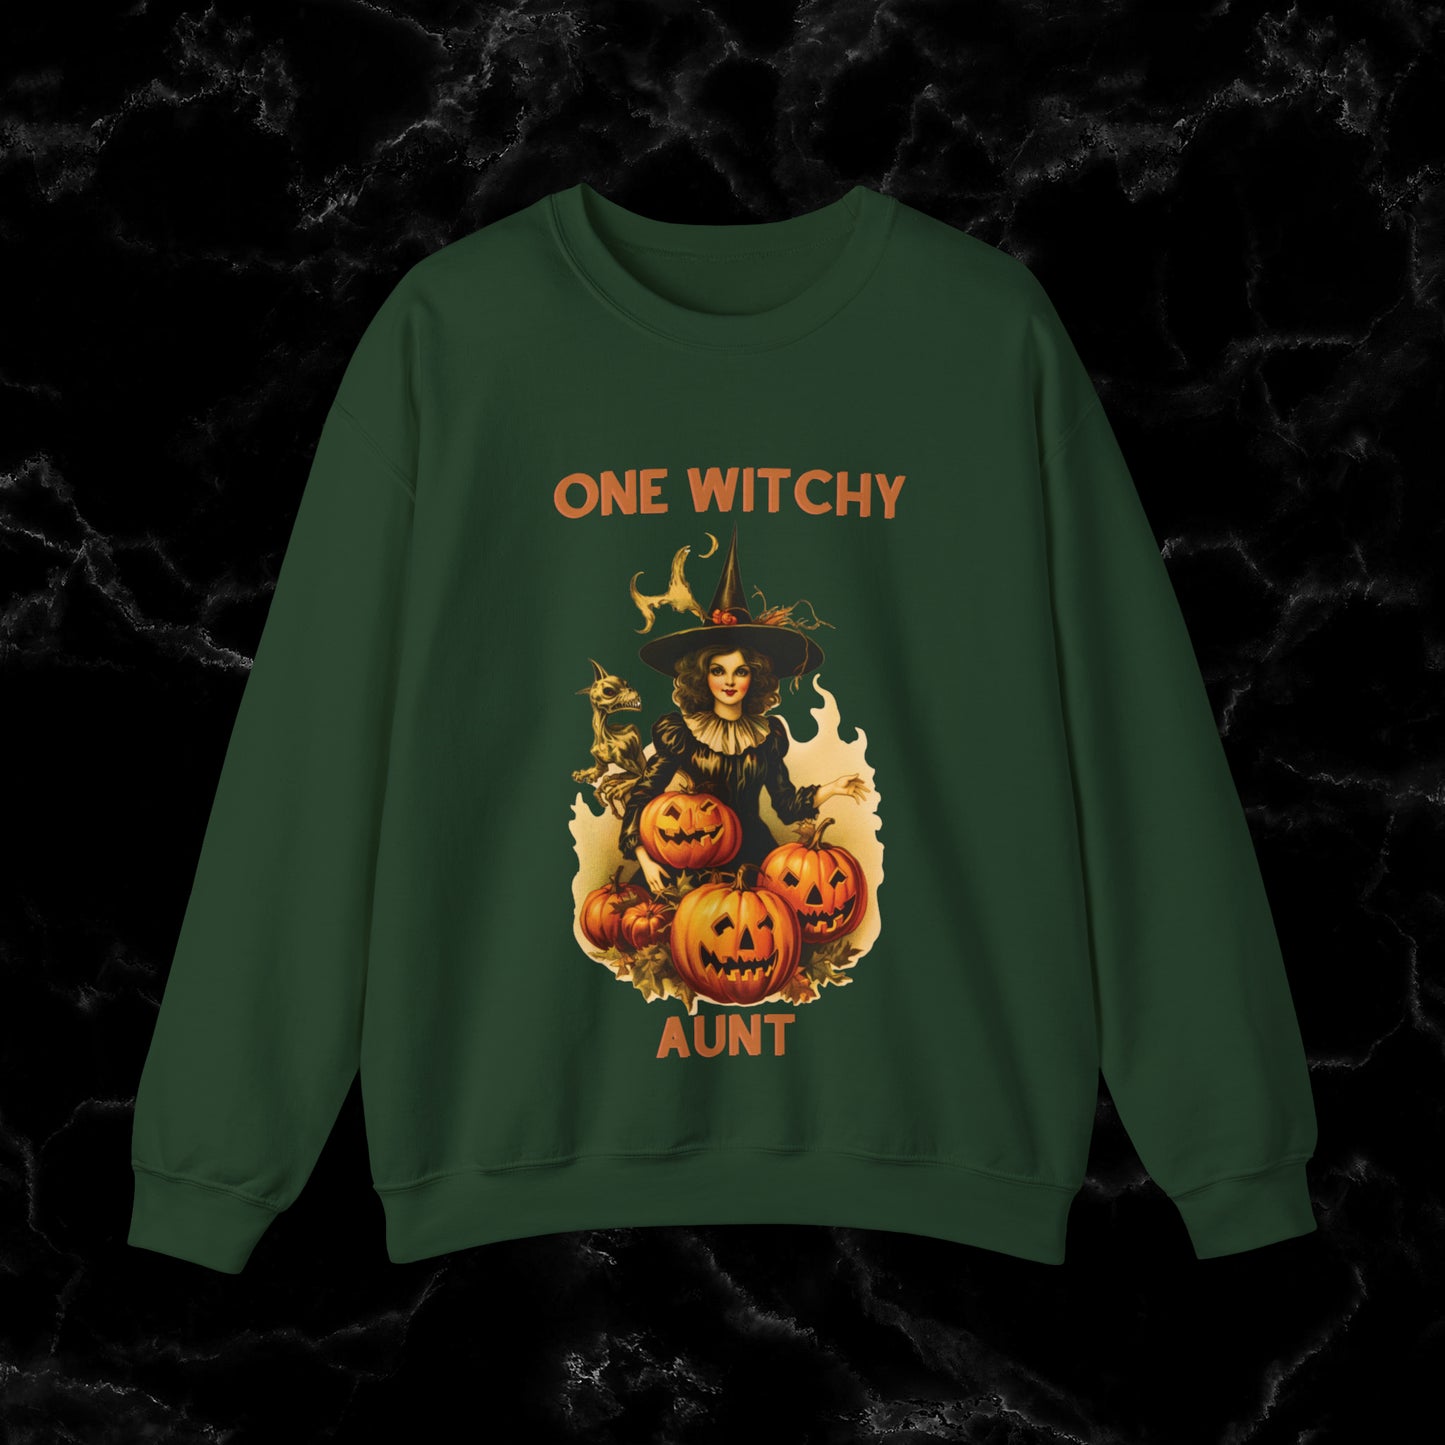 One Witchy Aunt Sweatshirt - Cool Aunt Shirt, Feral Aunt Sweatshirt, Perfect Gifts for Aunts, Auntie Sweatshirt Sweatshirt S Forest Green 